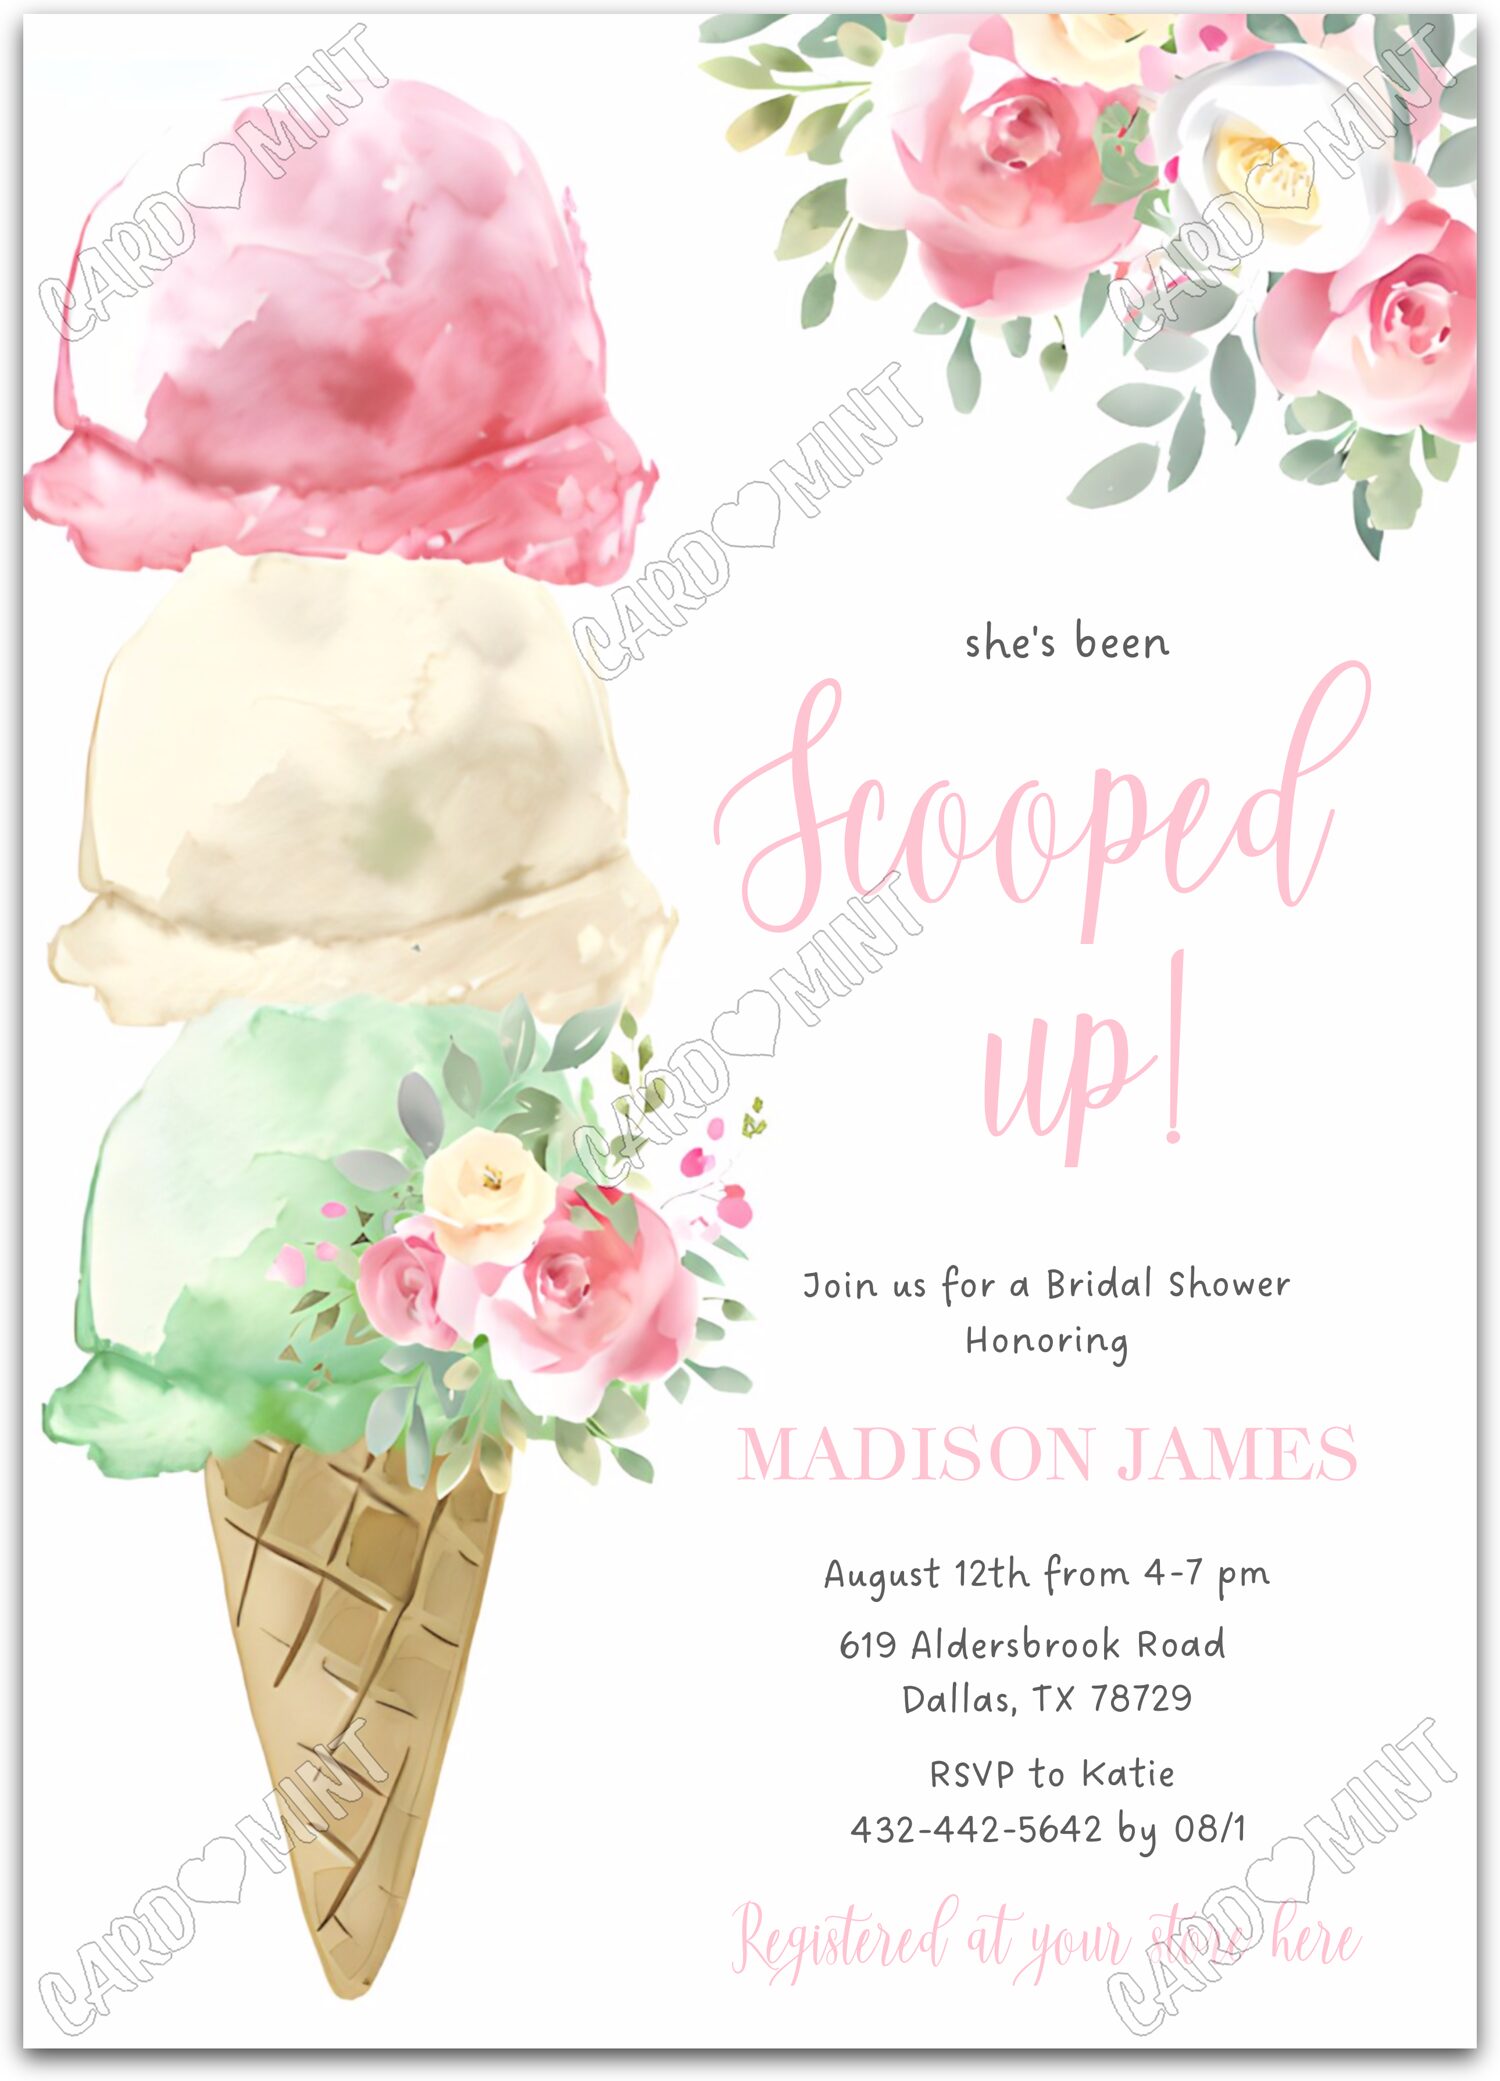 Editable Scooped Up white ice cream cones & floral pattern Bridal Shower 5"x7" Invitation EV2091